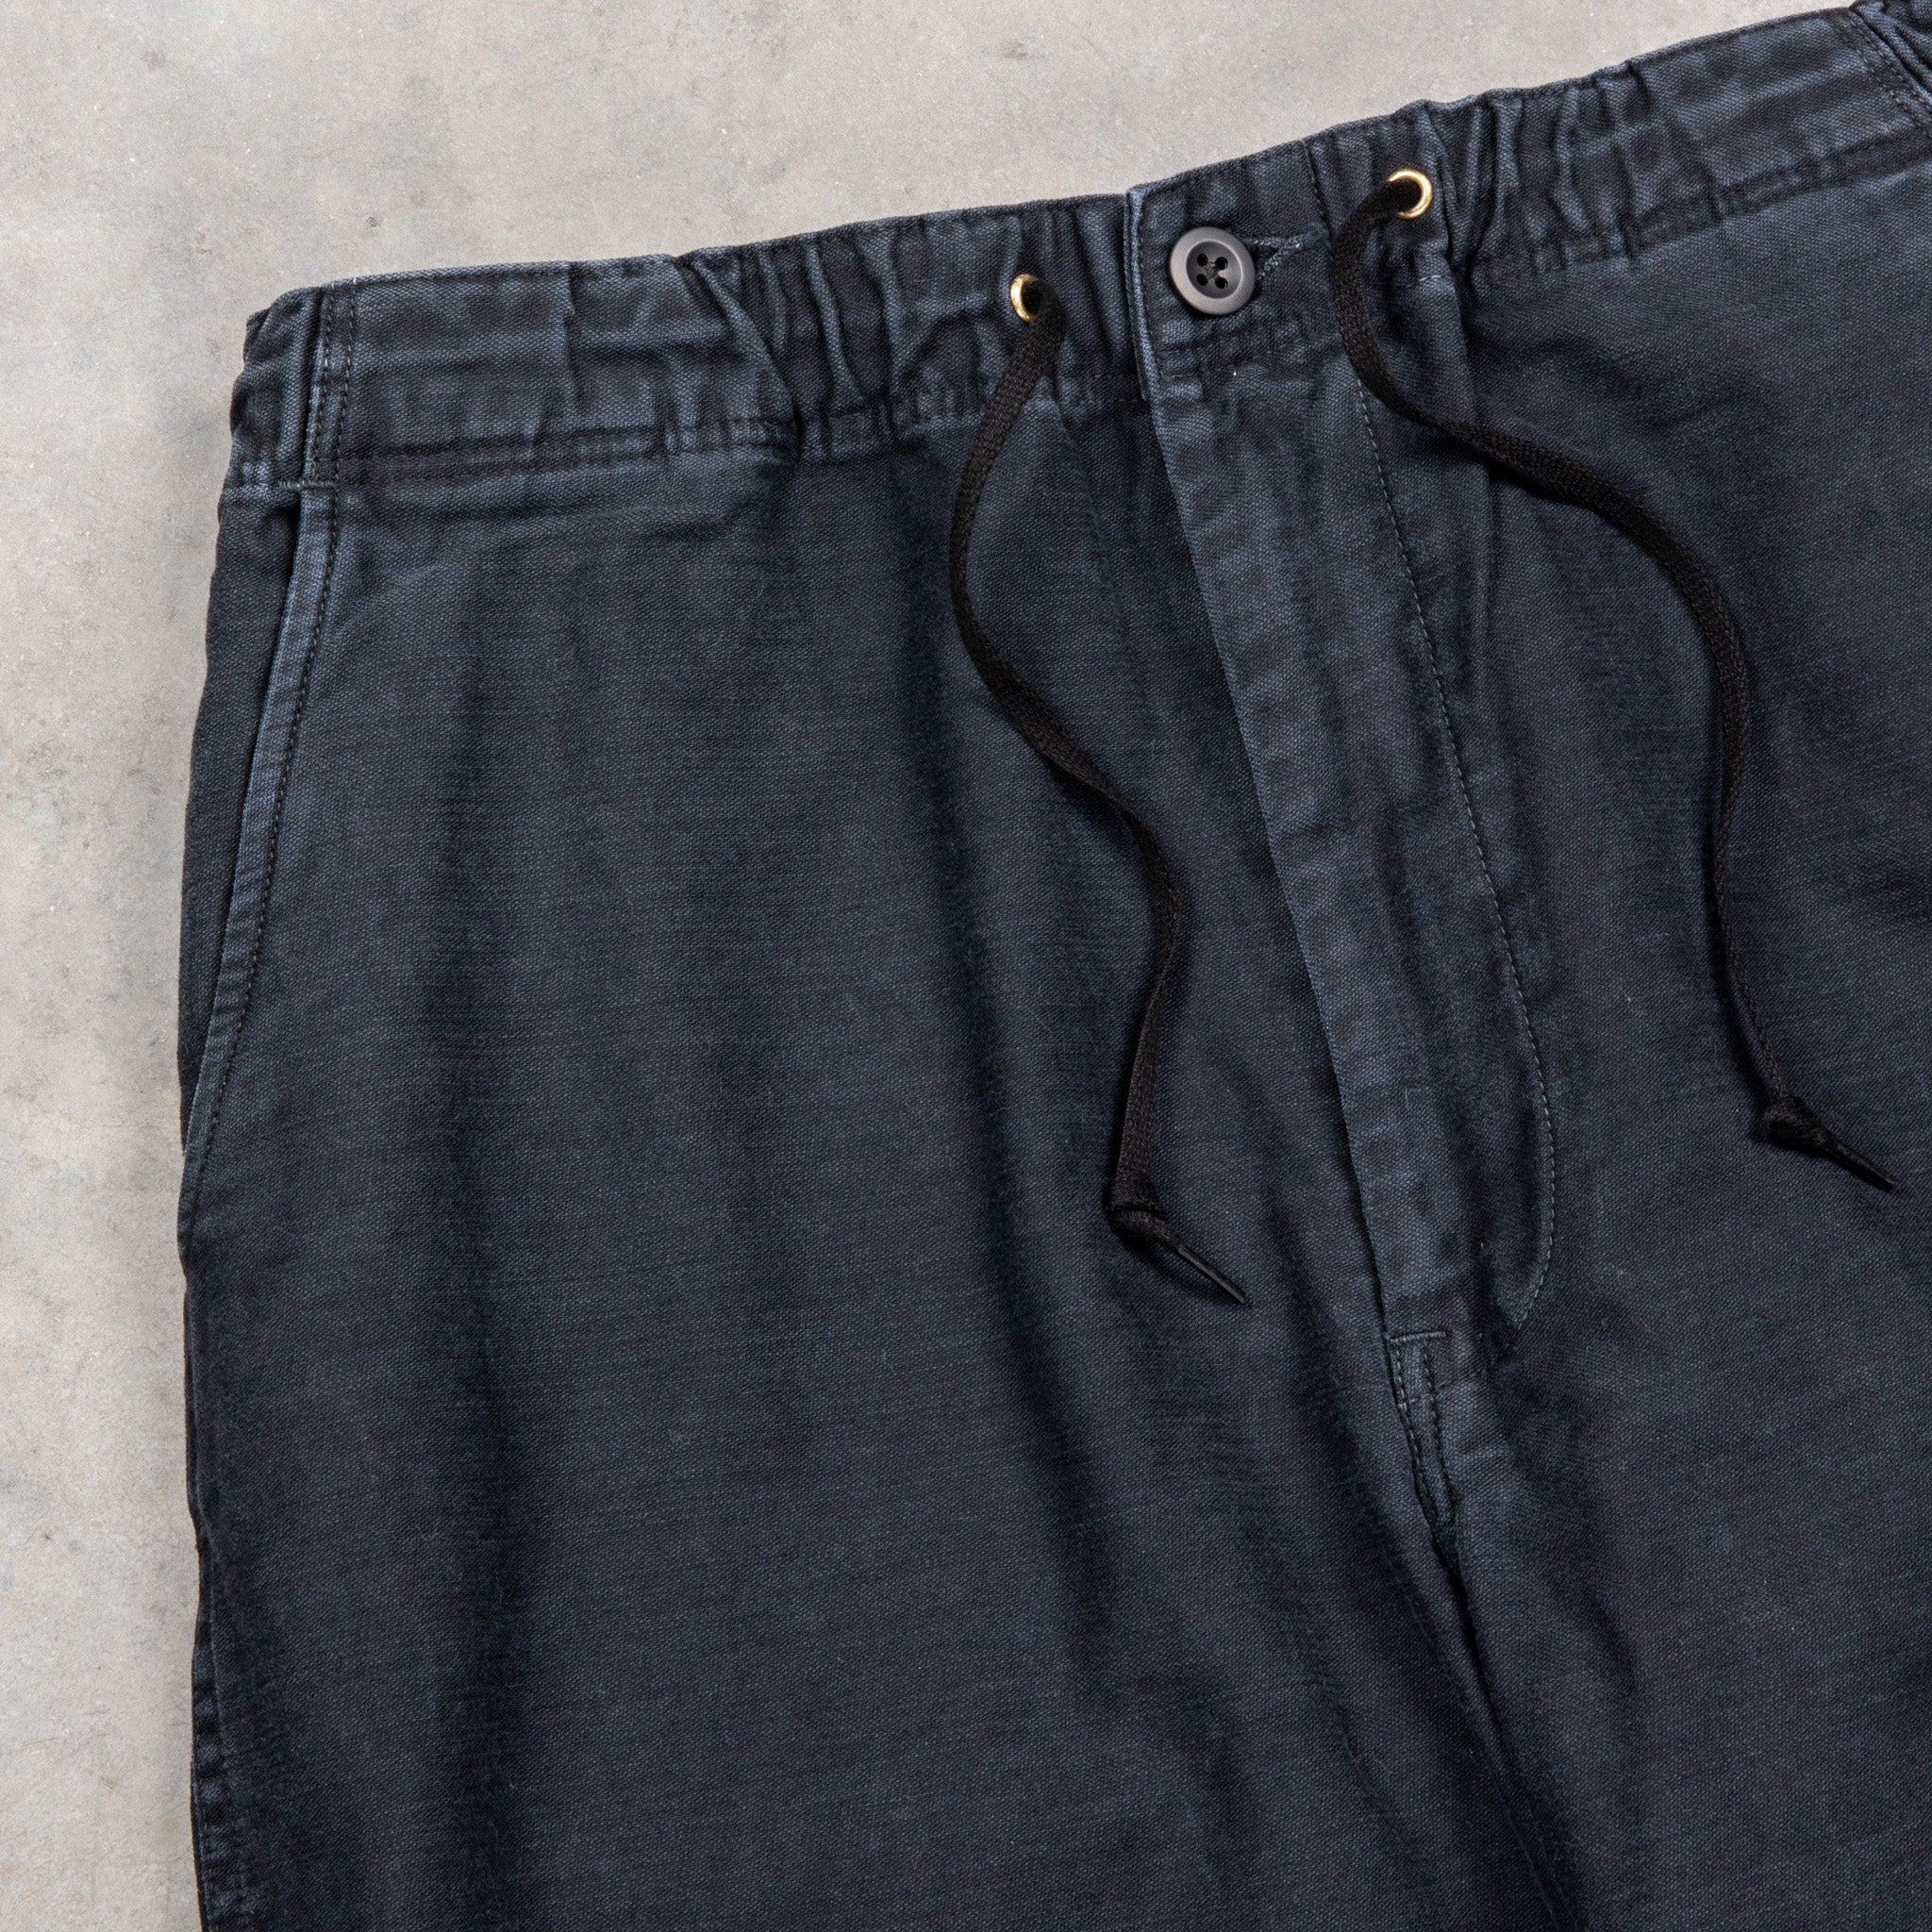 Orslow x Frans Boone Easy Pants Sateen Navy Stone